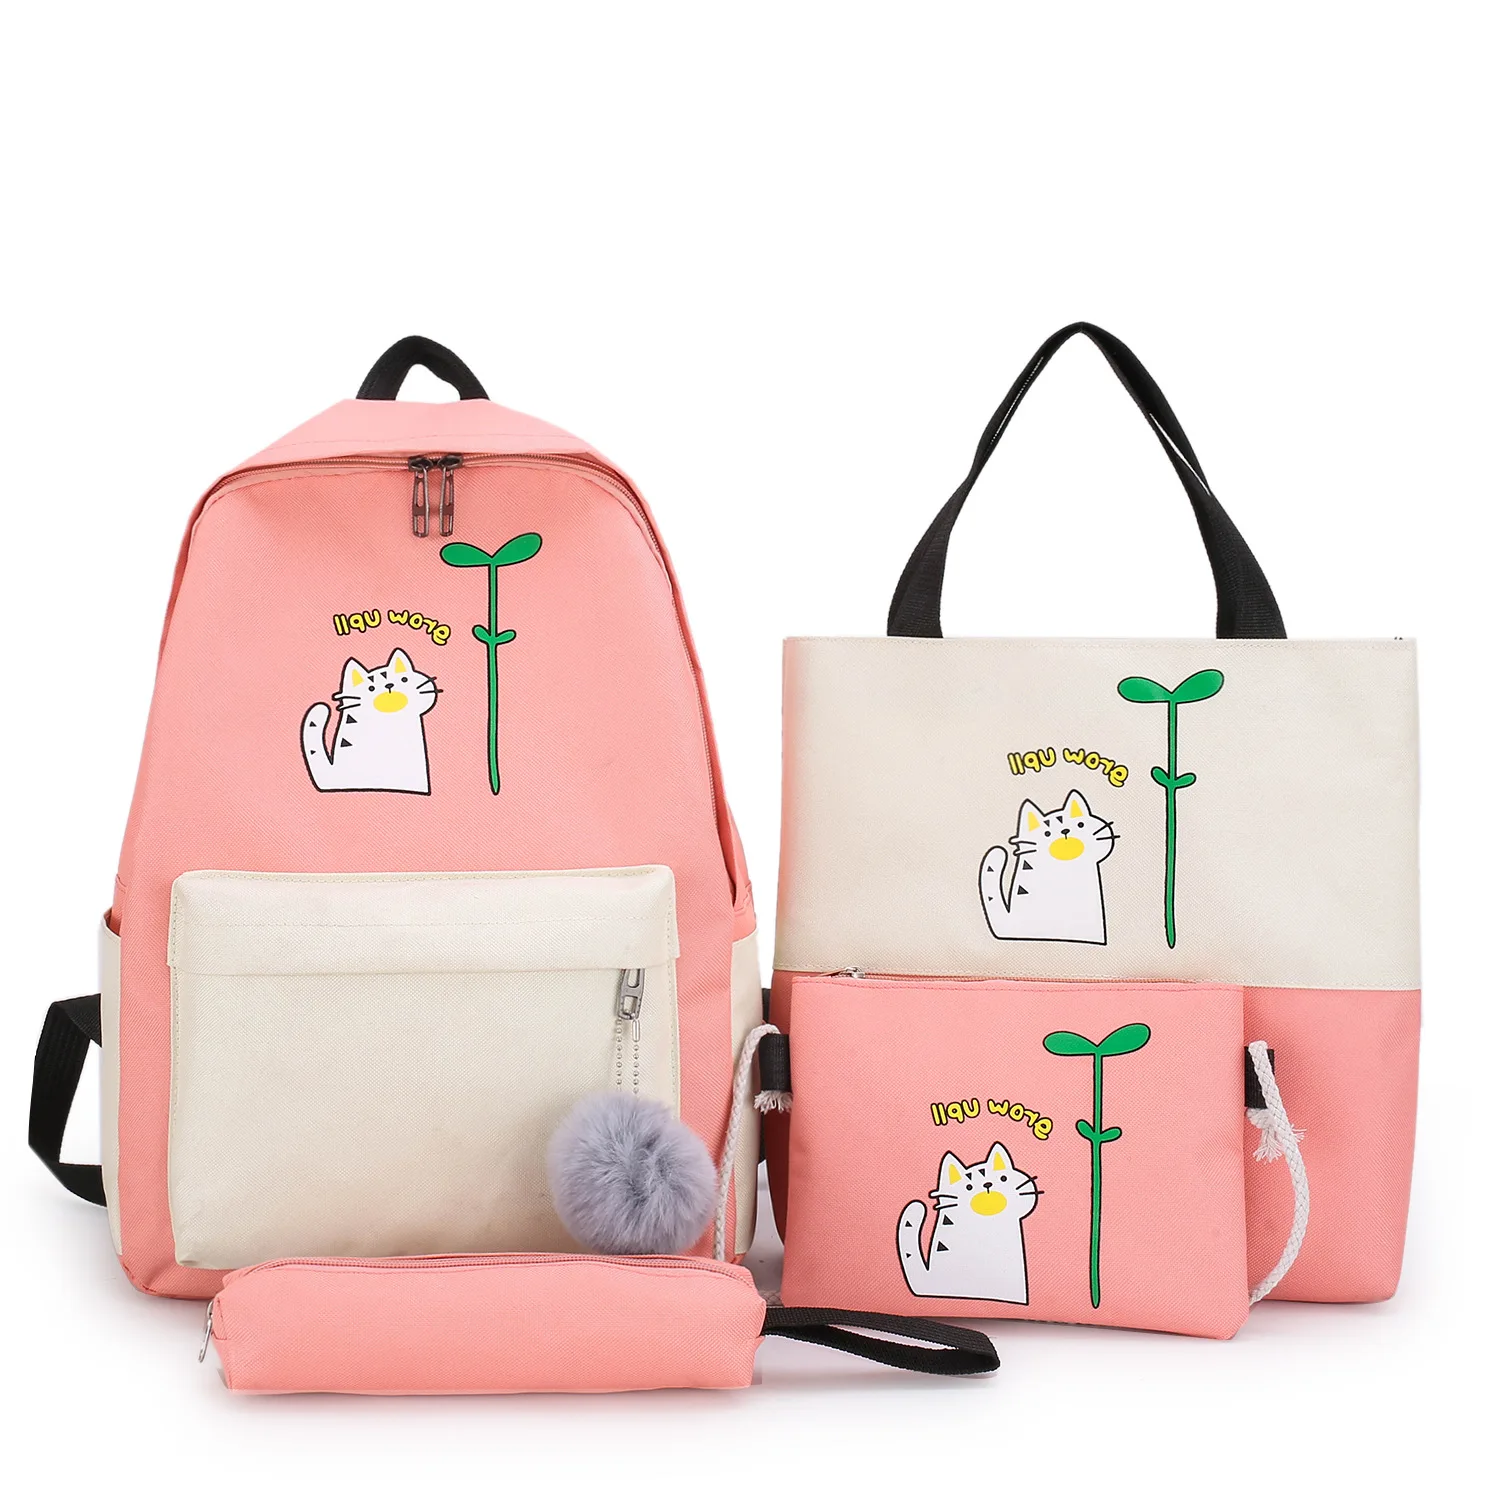 

2021 Hot Assorted colors Canvas School Backpacks College Backpack for girls 4pcs set waterproof backpack Bag, More than 10 colors or customized